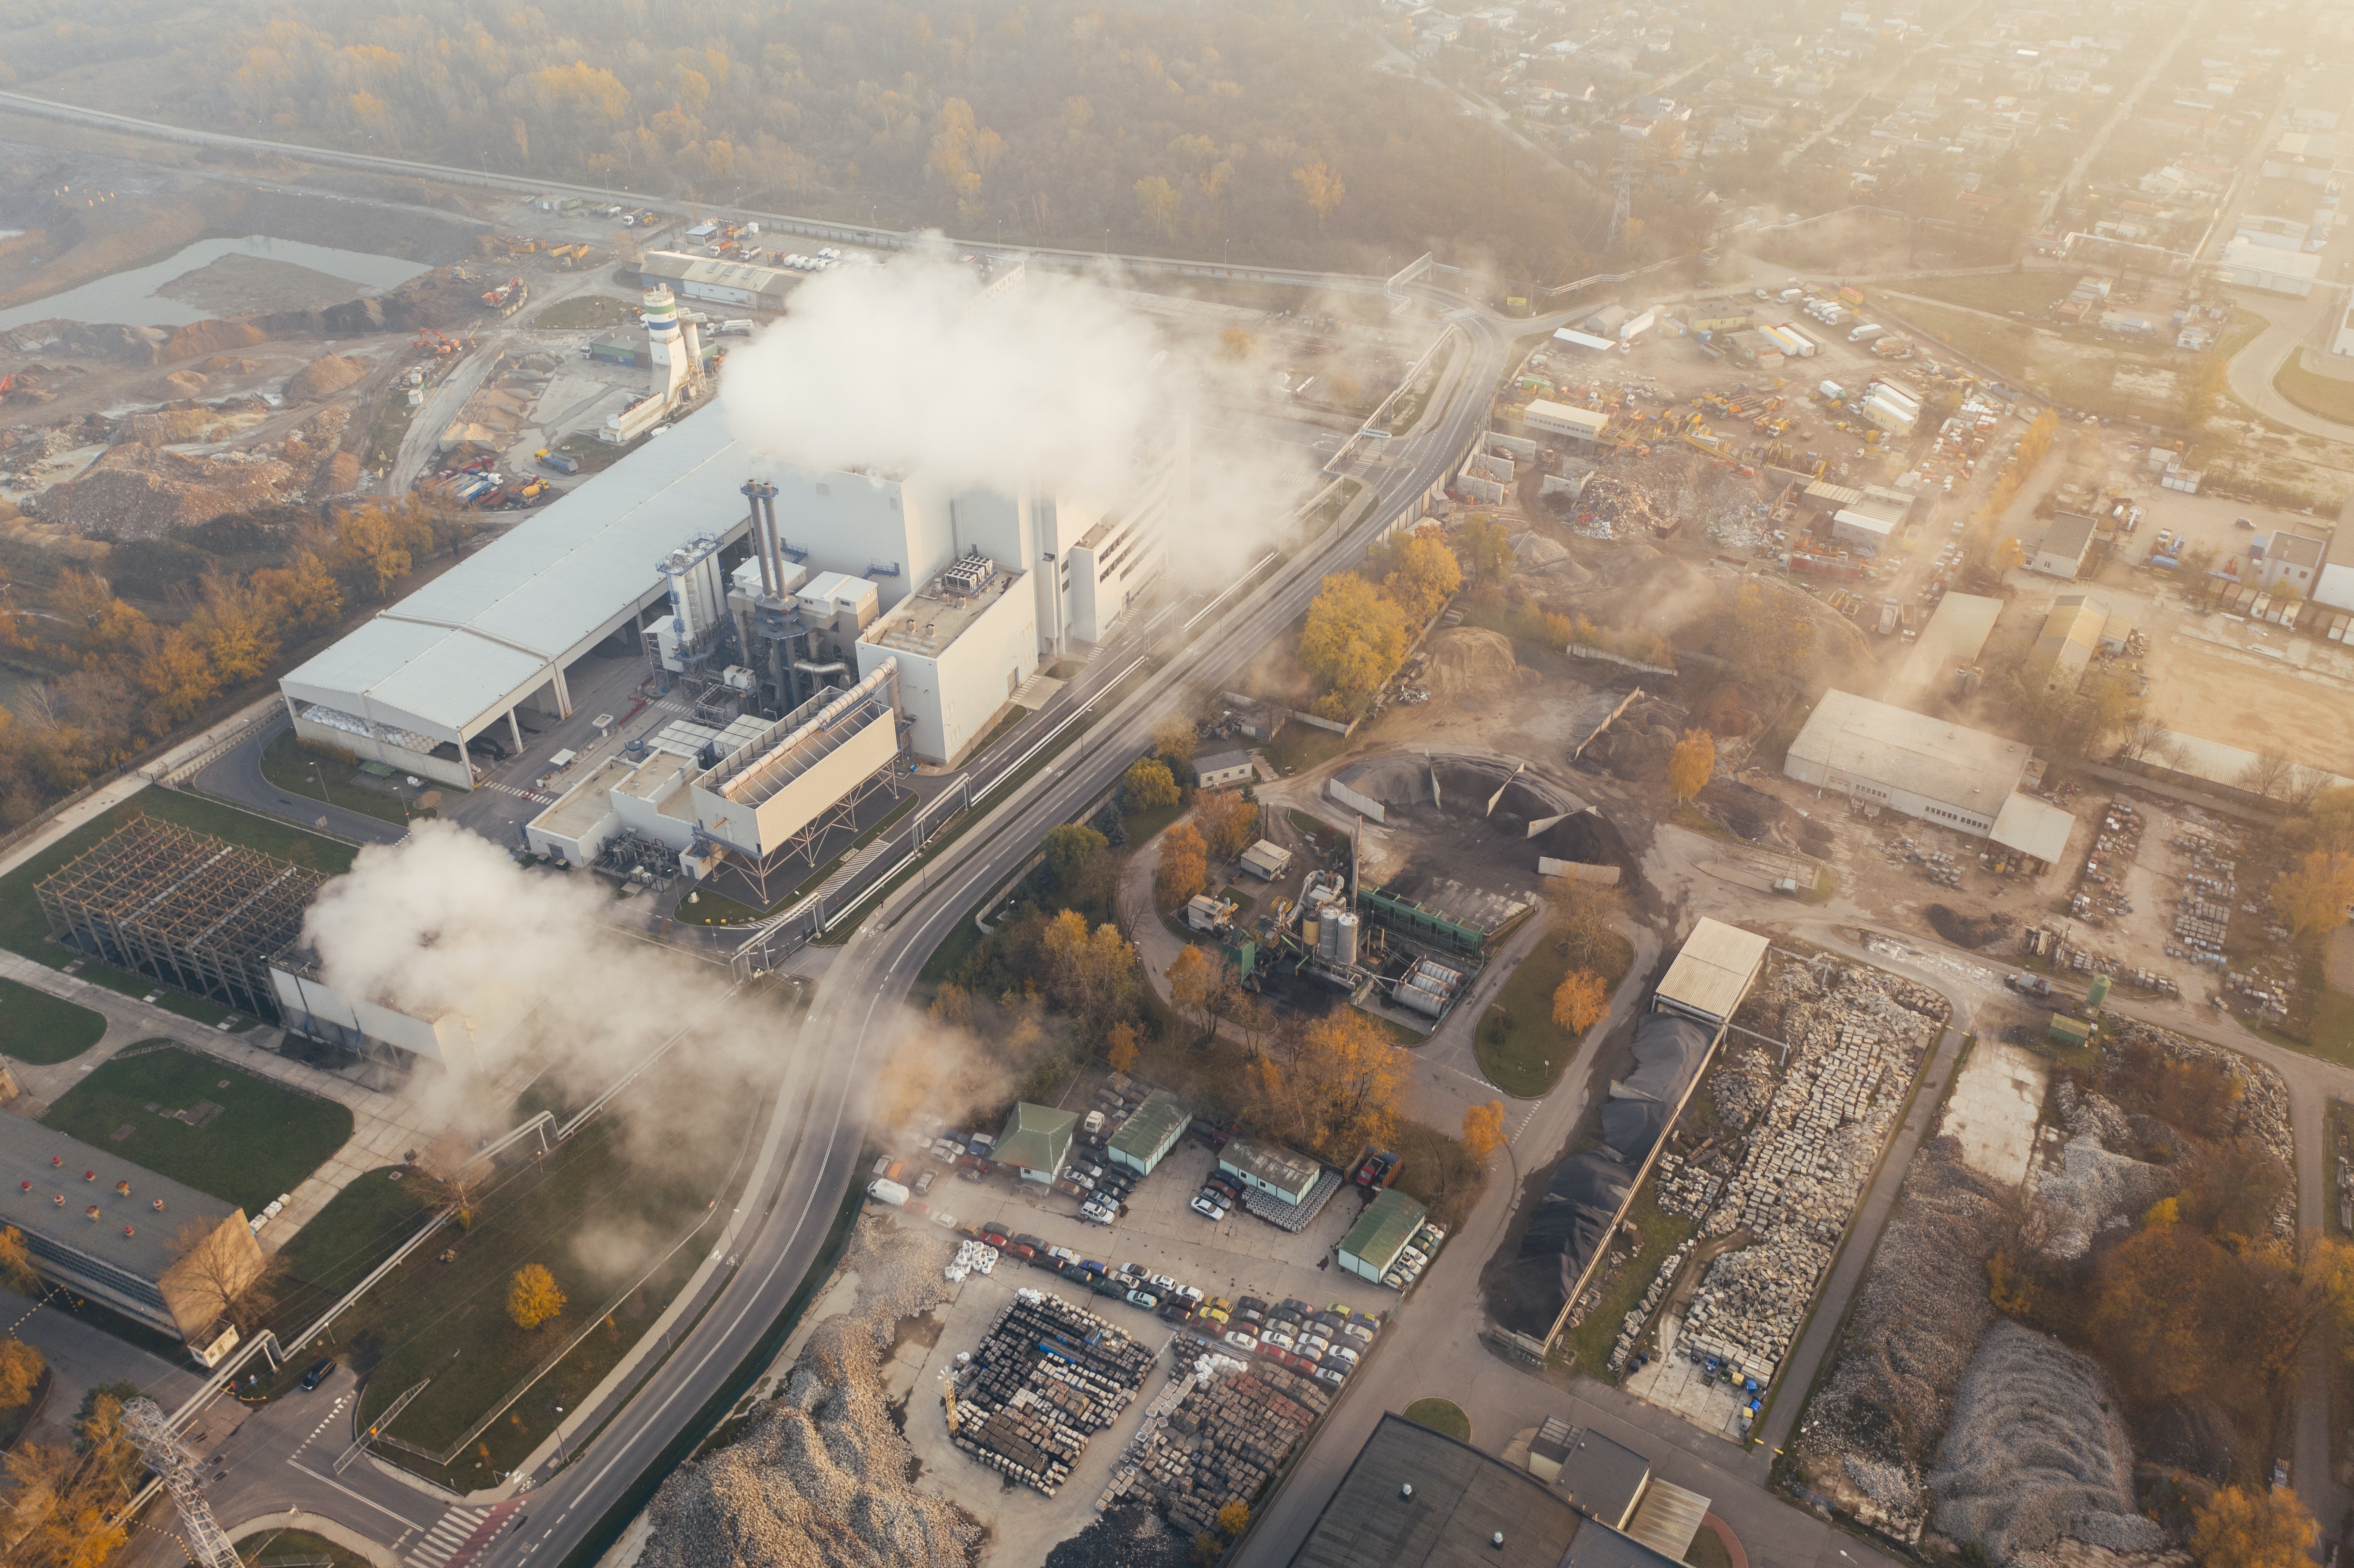 i18n: An Aerial View Of Billowing Fumes From Factories